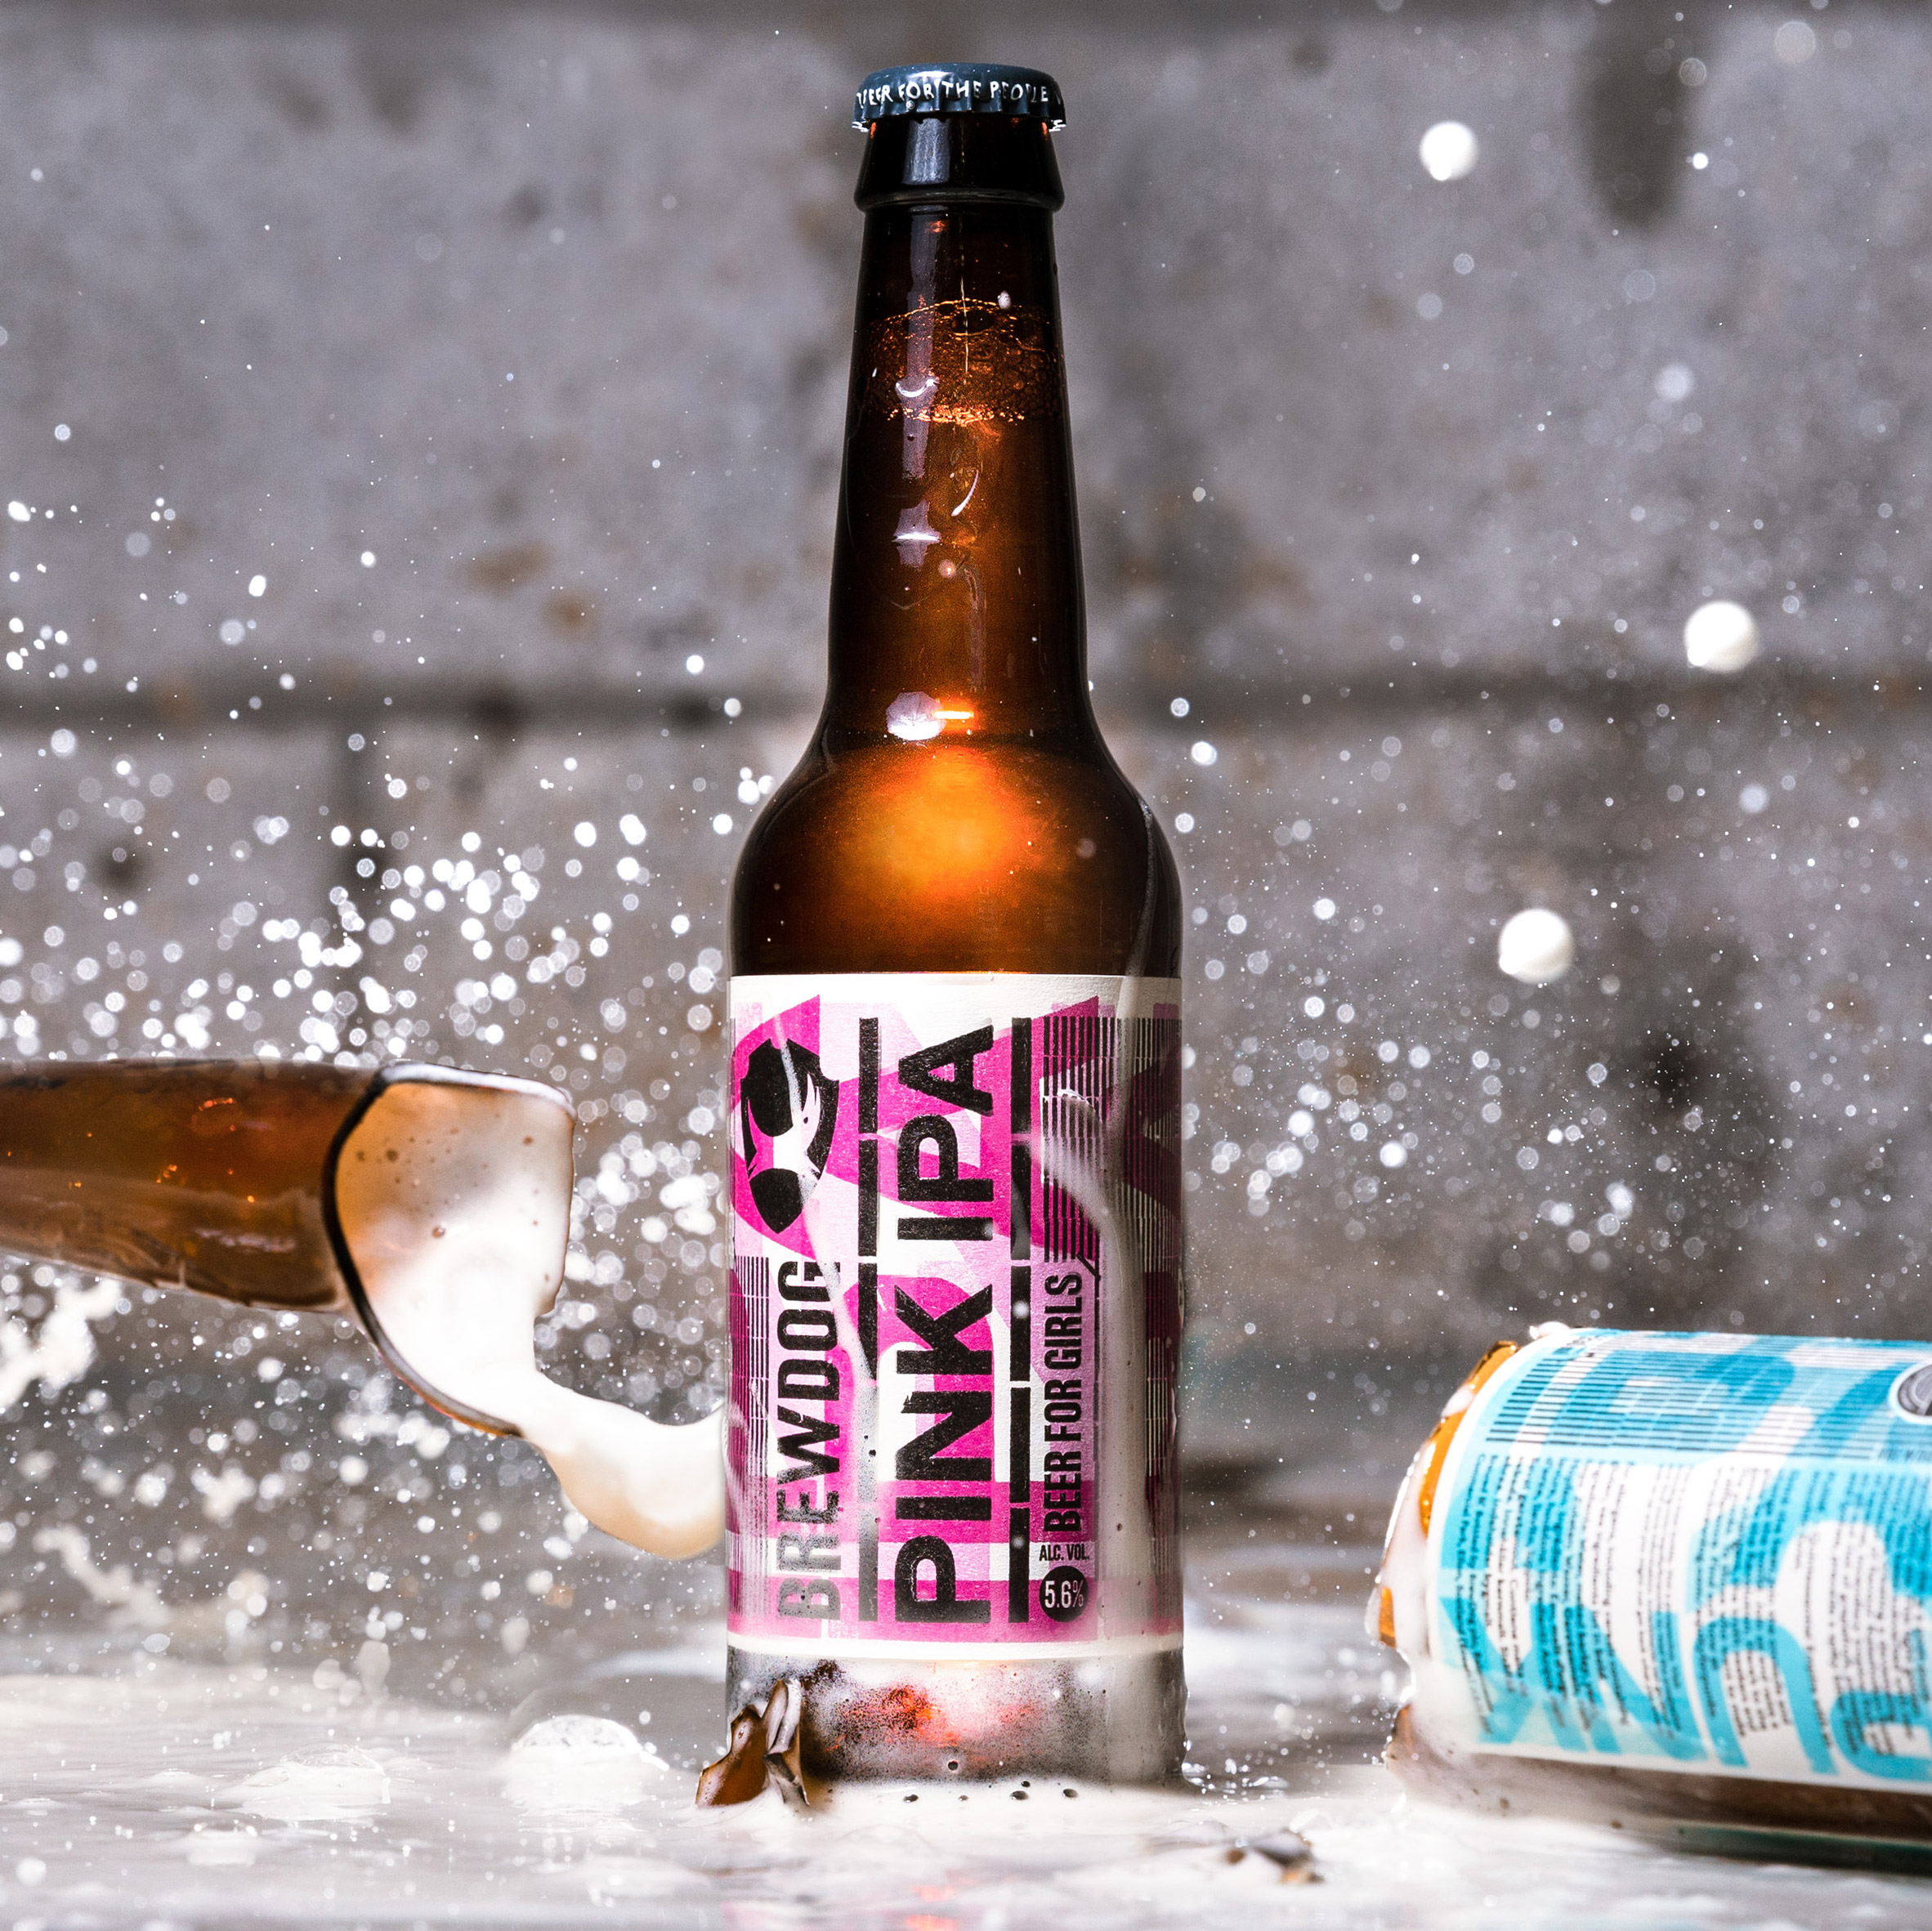 Beer brand Brewdog has released a satirical "beer for girls" ahead of International Woman's Day on 8 March,